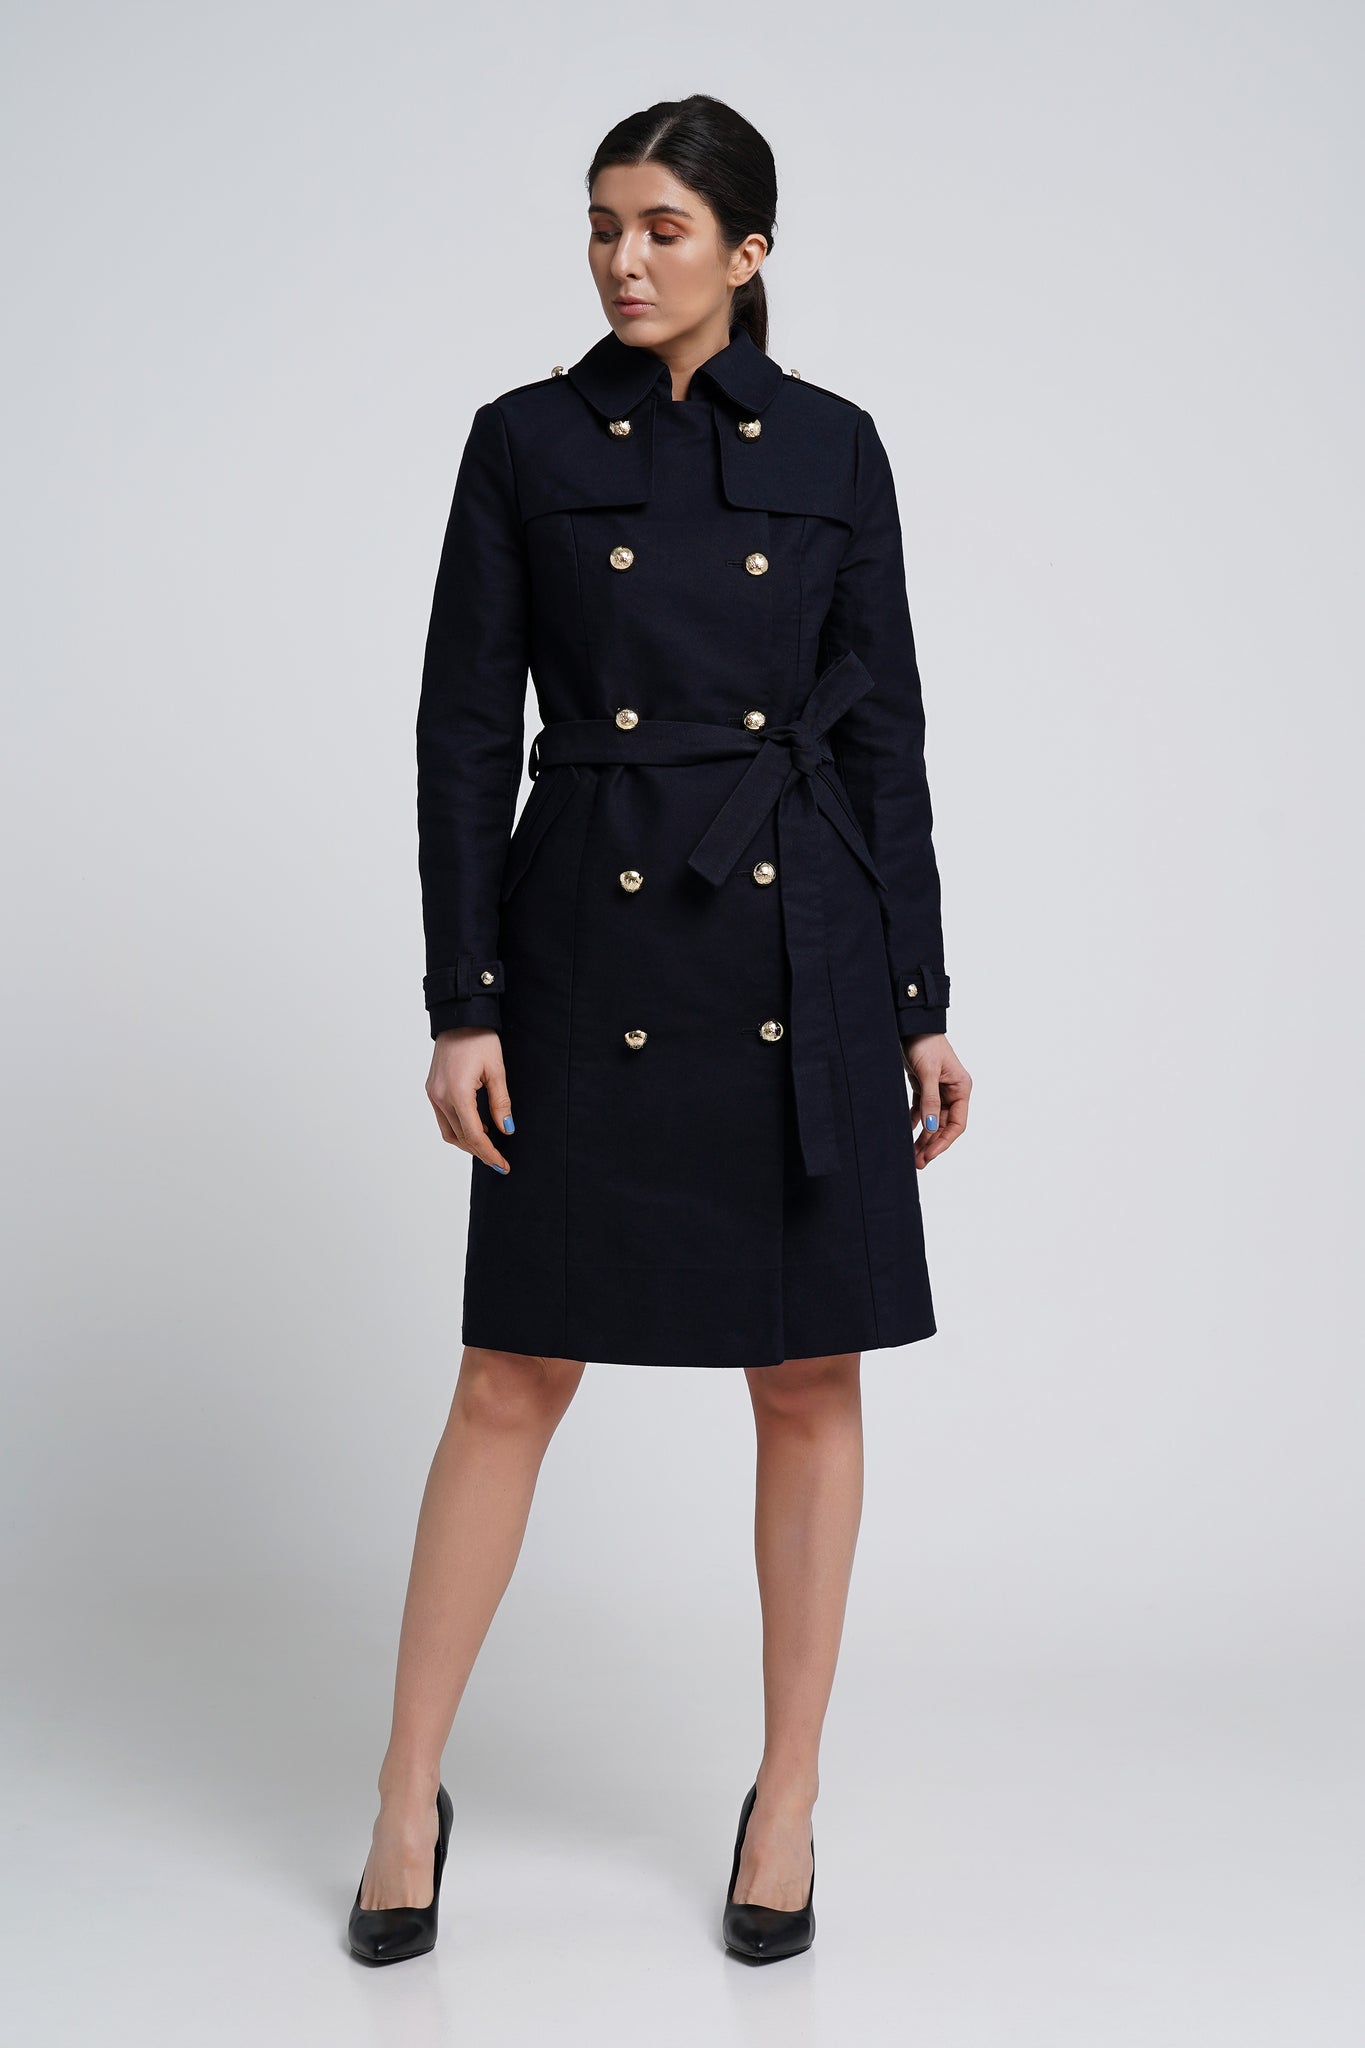 Double-Breasted Trench Coat Women's gold buttons | www.tavrovska.com ...